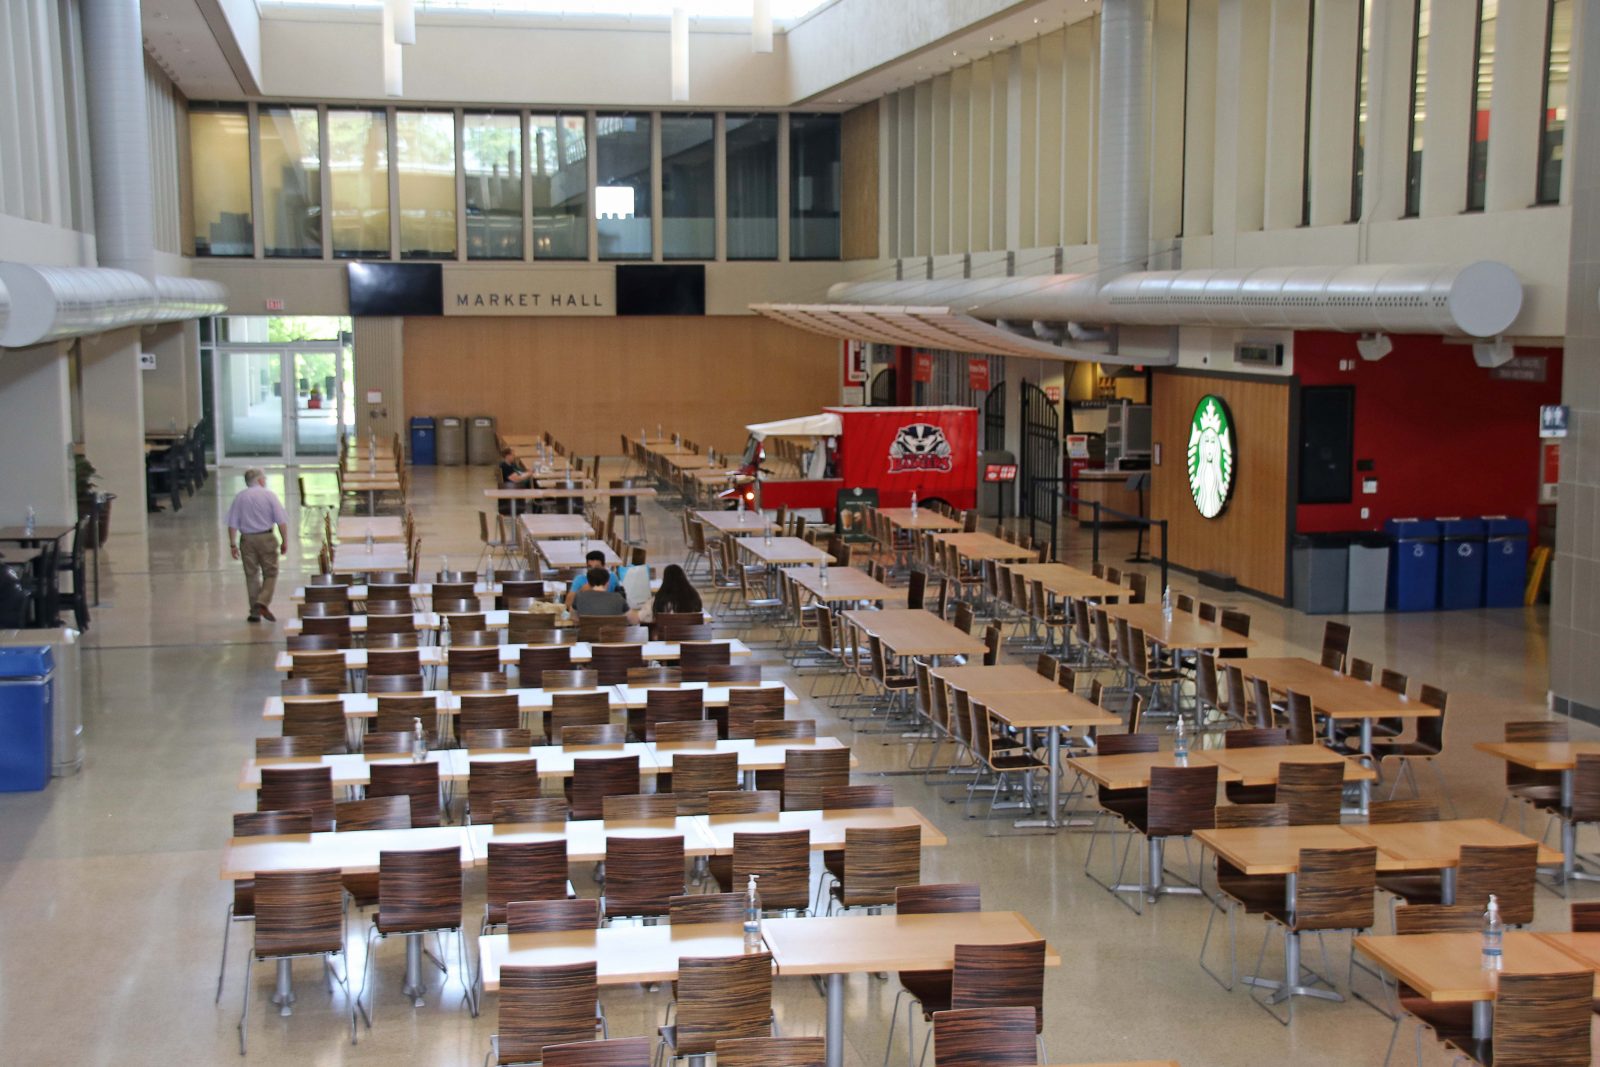 An empty dining hall with rows of chairs and tables.